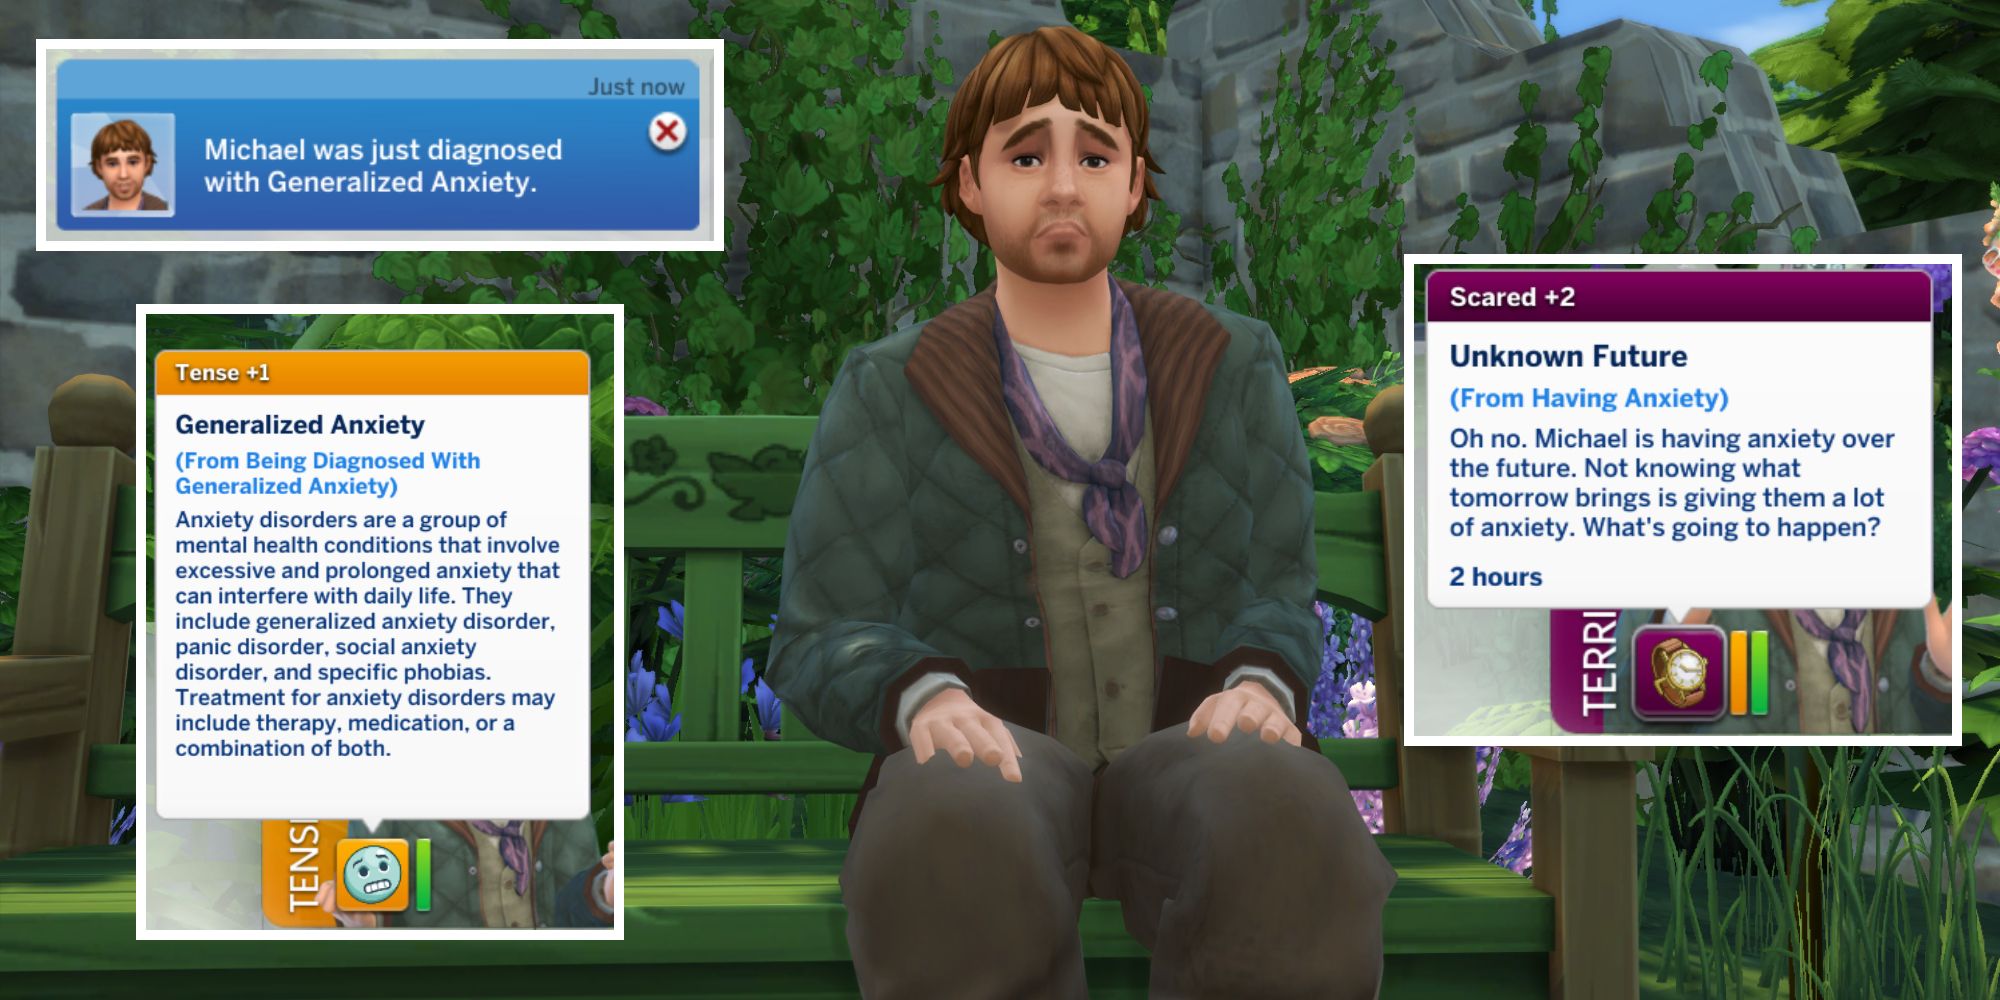 The Mental Wellness Mod allows Sims to get diagnosed with mental disorders